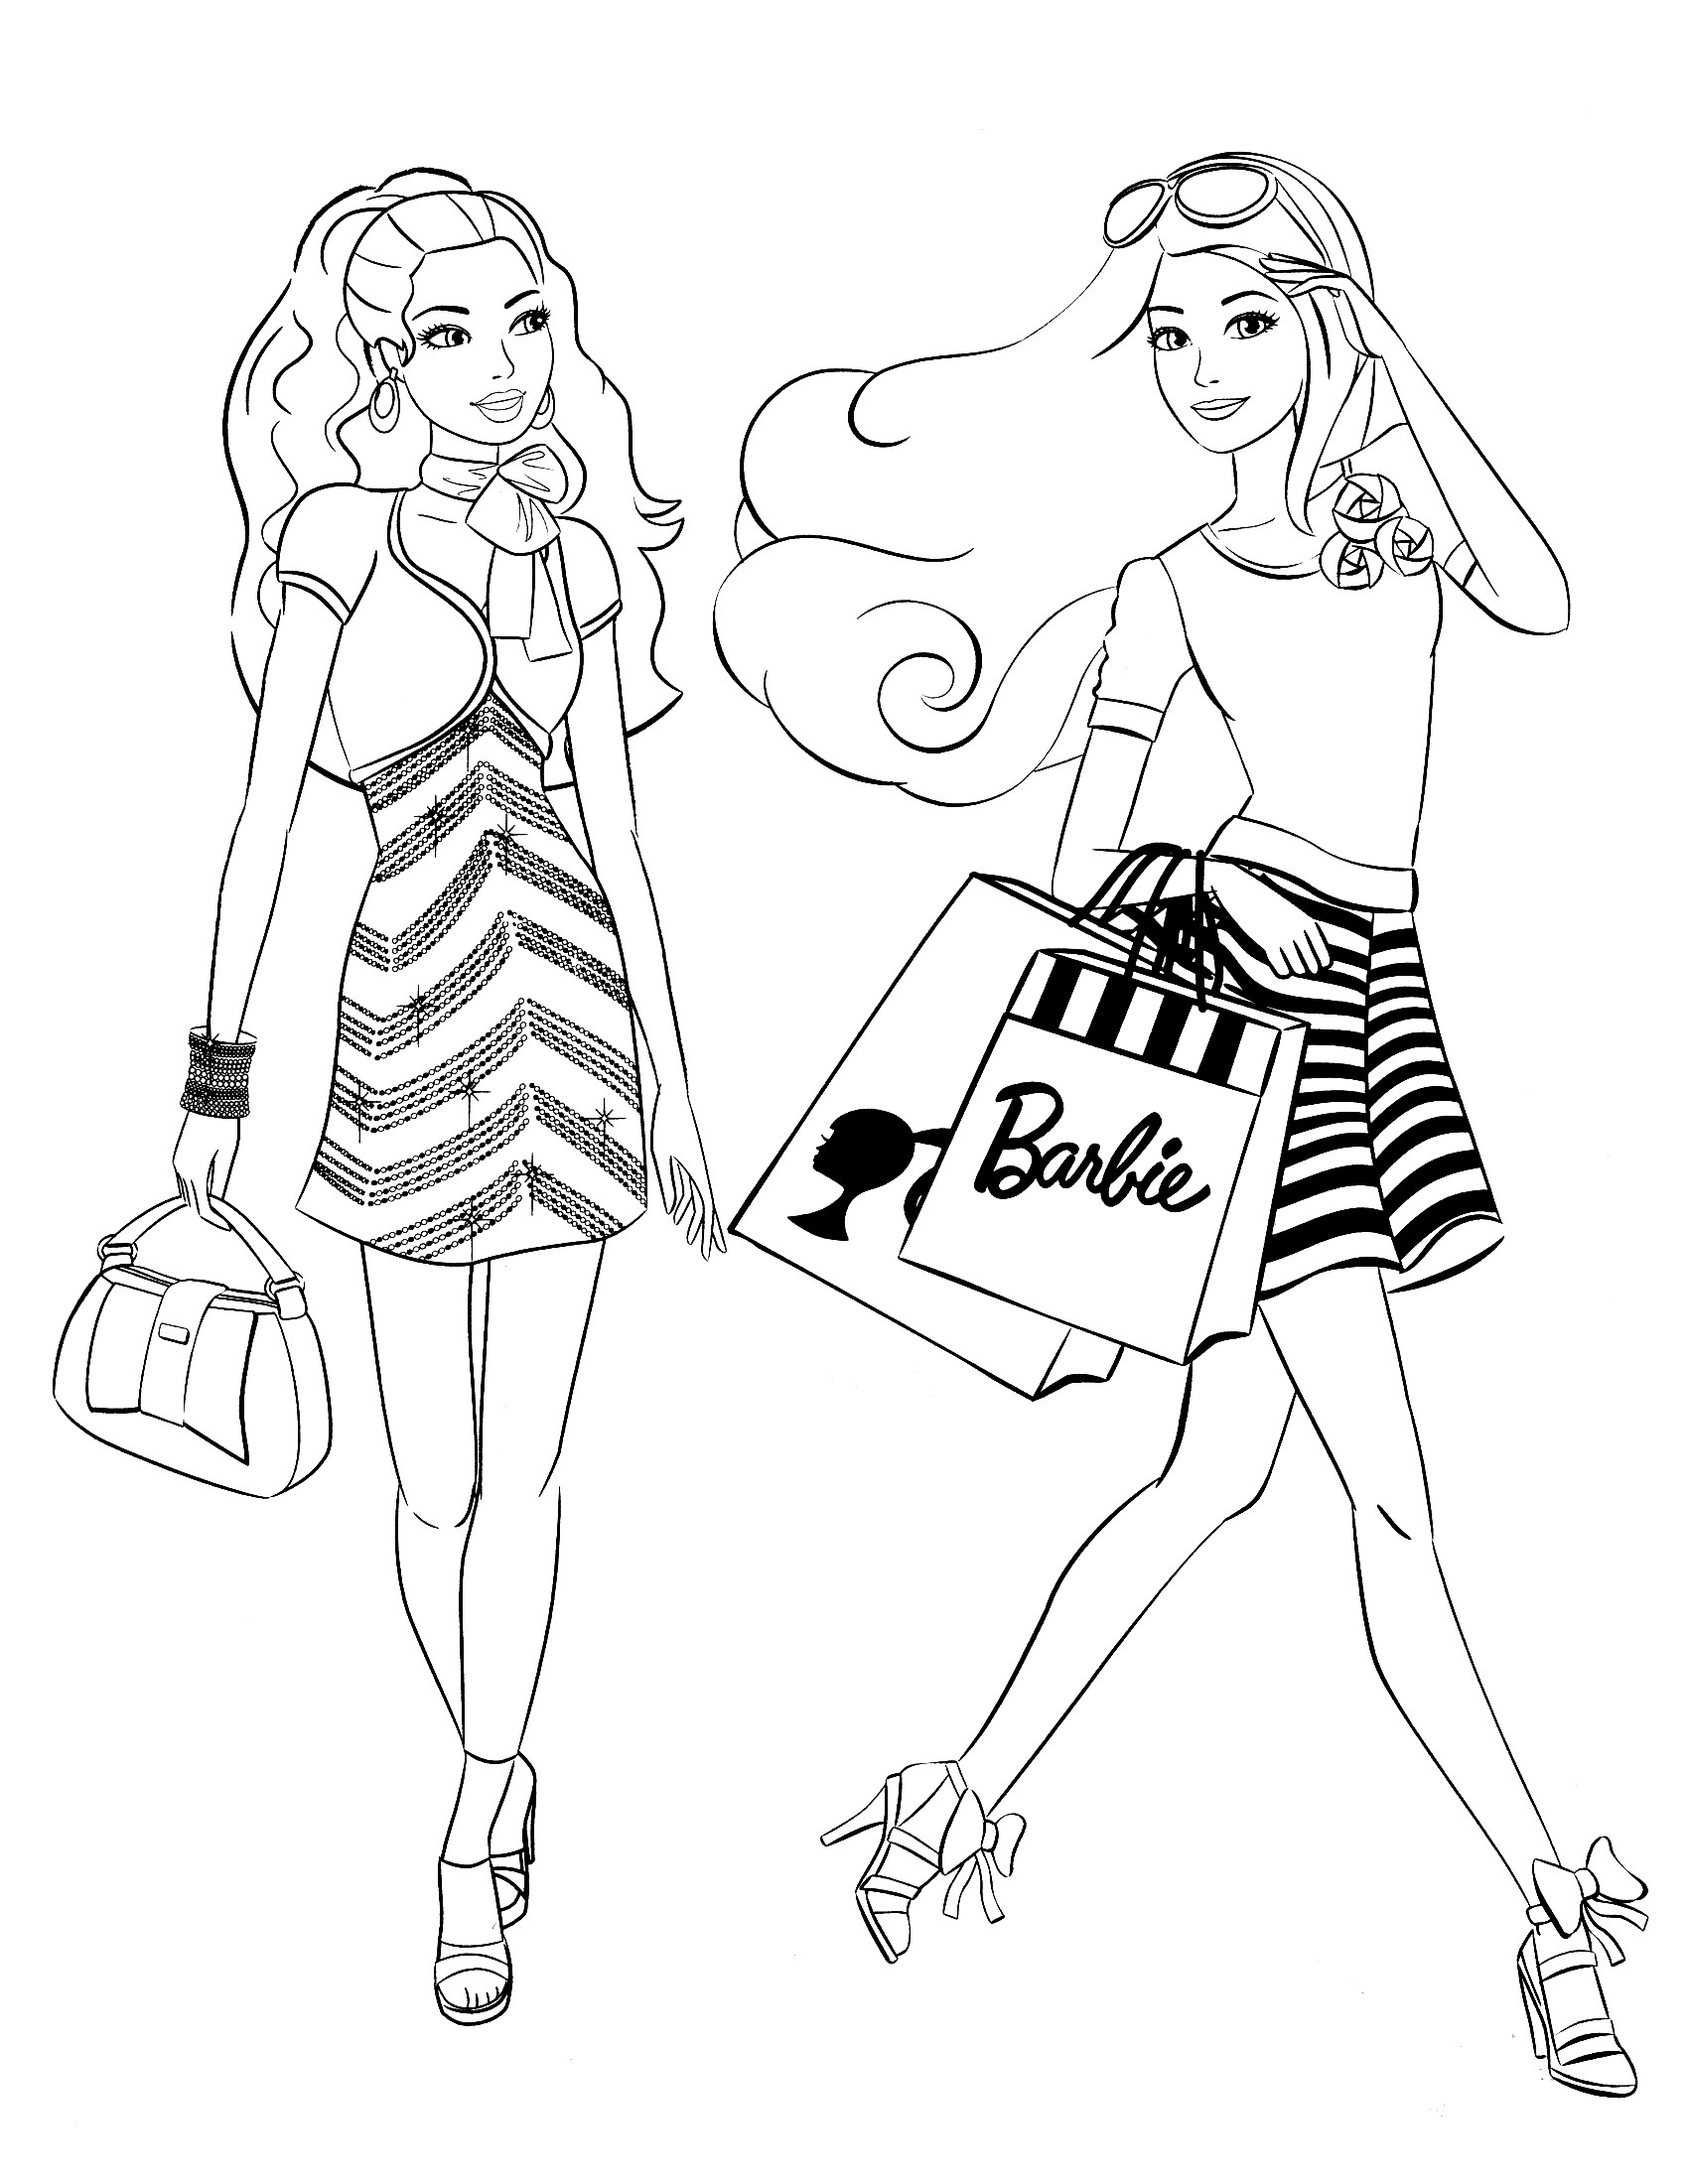 Barbie Coloring Pages For Girls
 85 Barbie Coloring Pages for Girls Barbie Princess